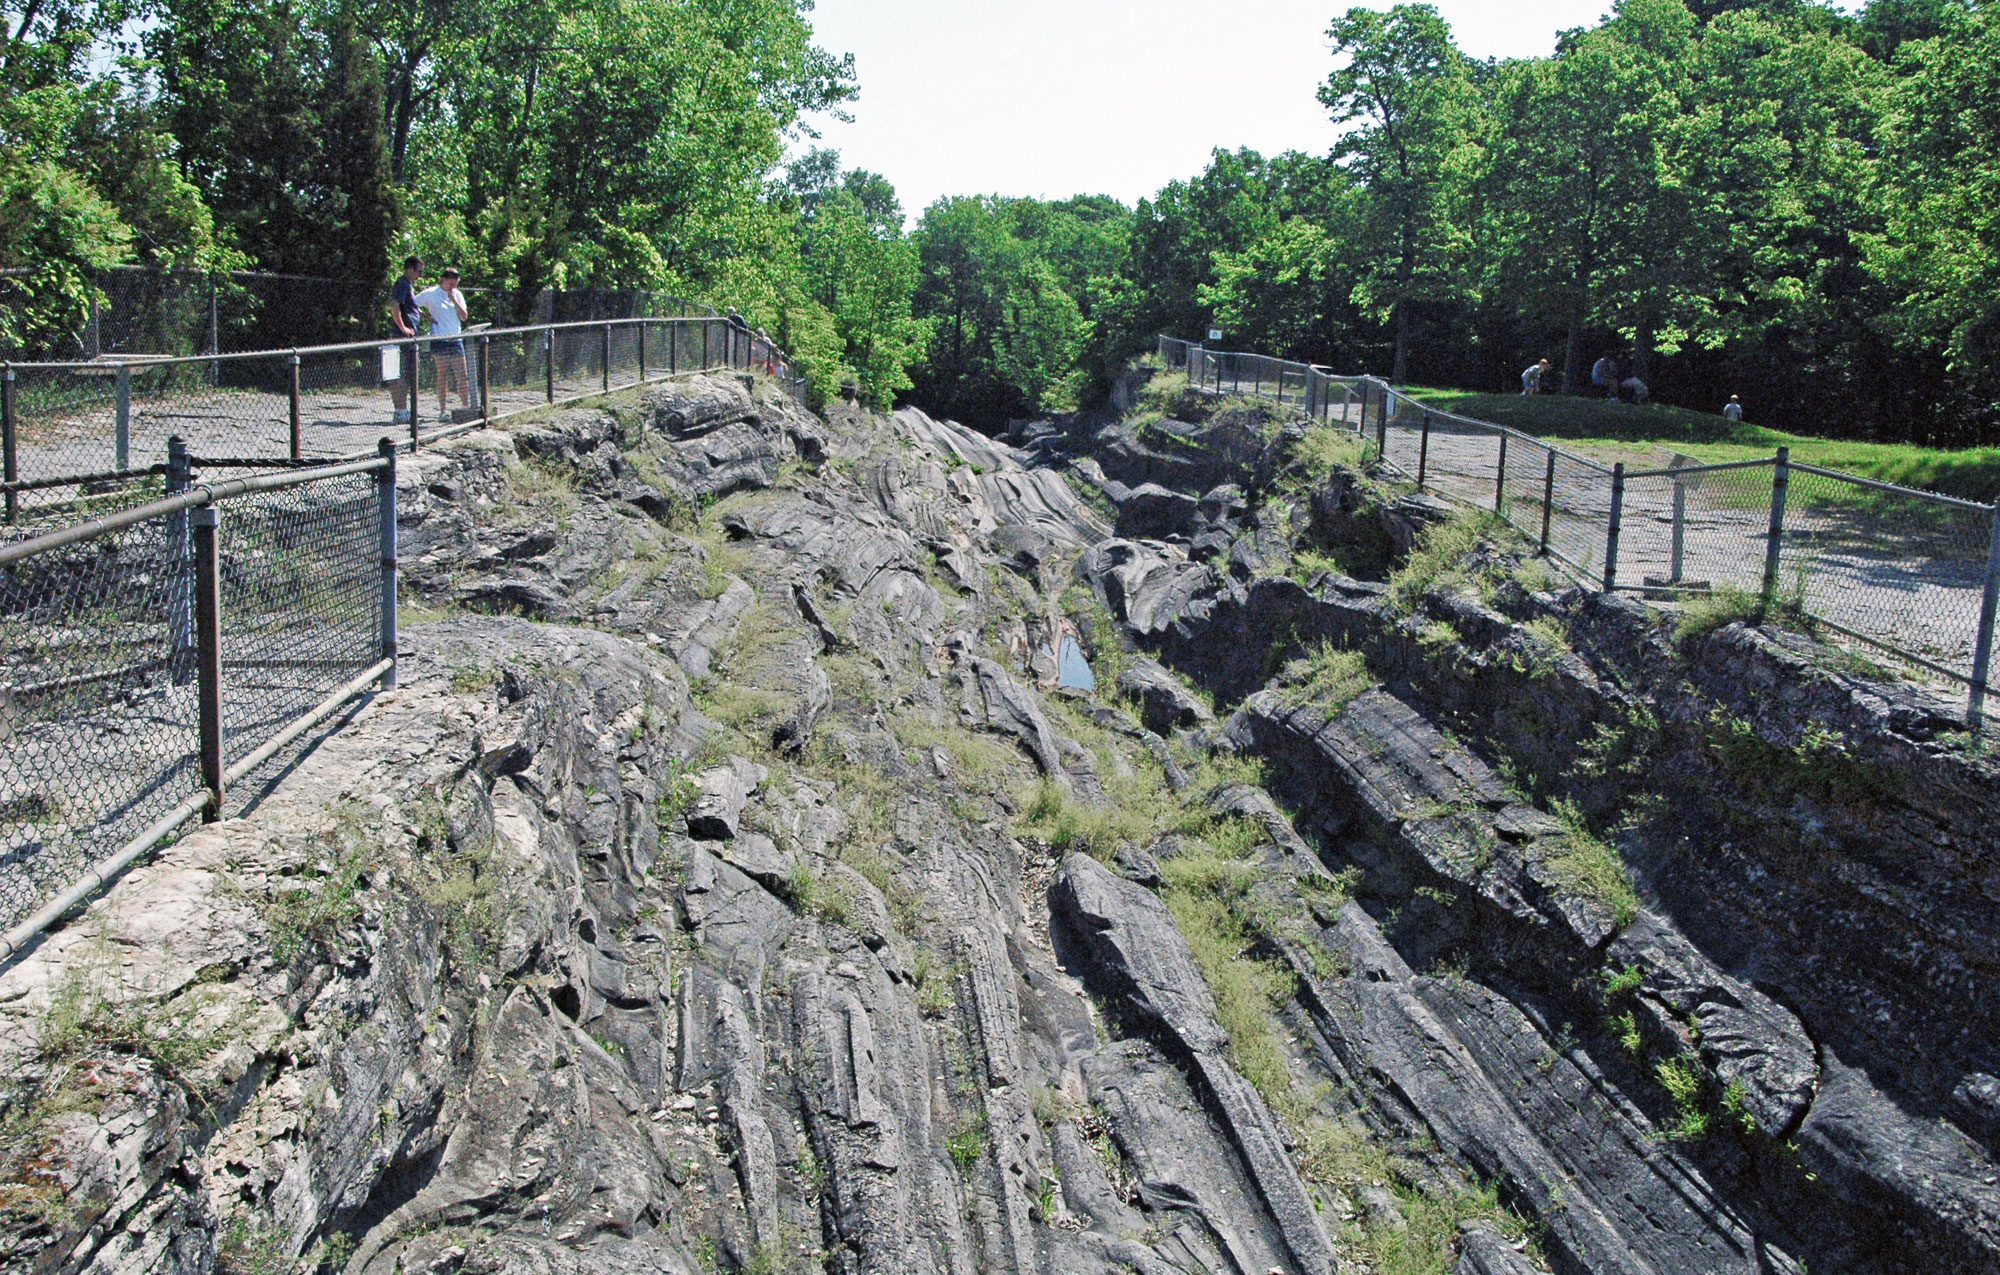 Photograph showing glacial grooves on Kelleys Island in Lake Erie, Ohio. The photo shows a linear channel carved through gray rock. The channel is lined with long, roughly parallel grooves. A chainlink fence borders either side of the channel, and two people can be seen behind the fence on the left of the image looking into the channel. Around the channel, the landscape is forested.